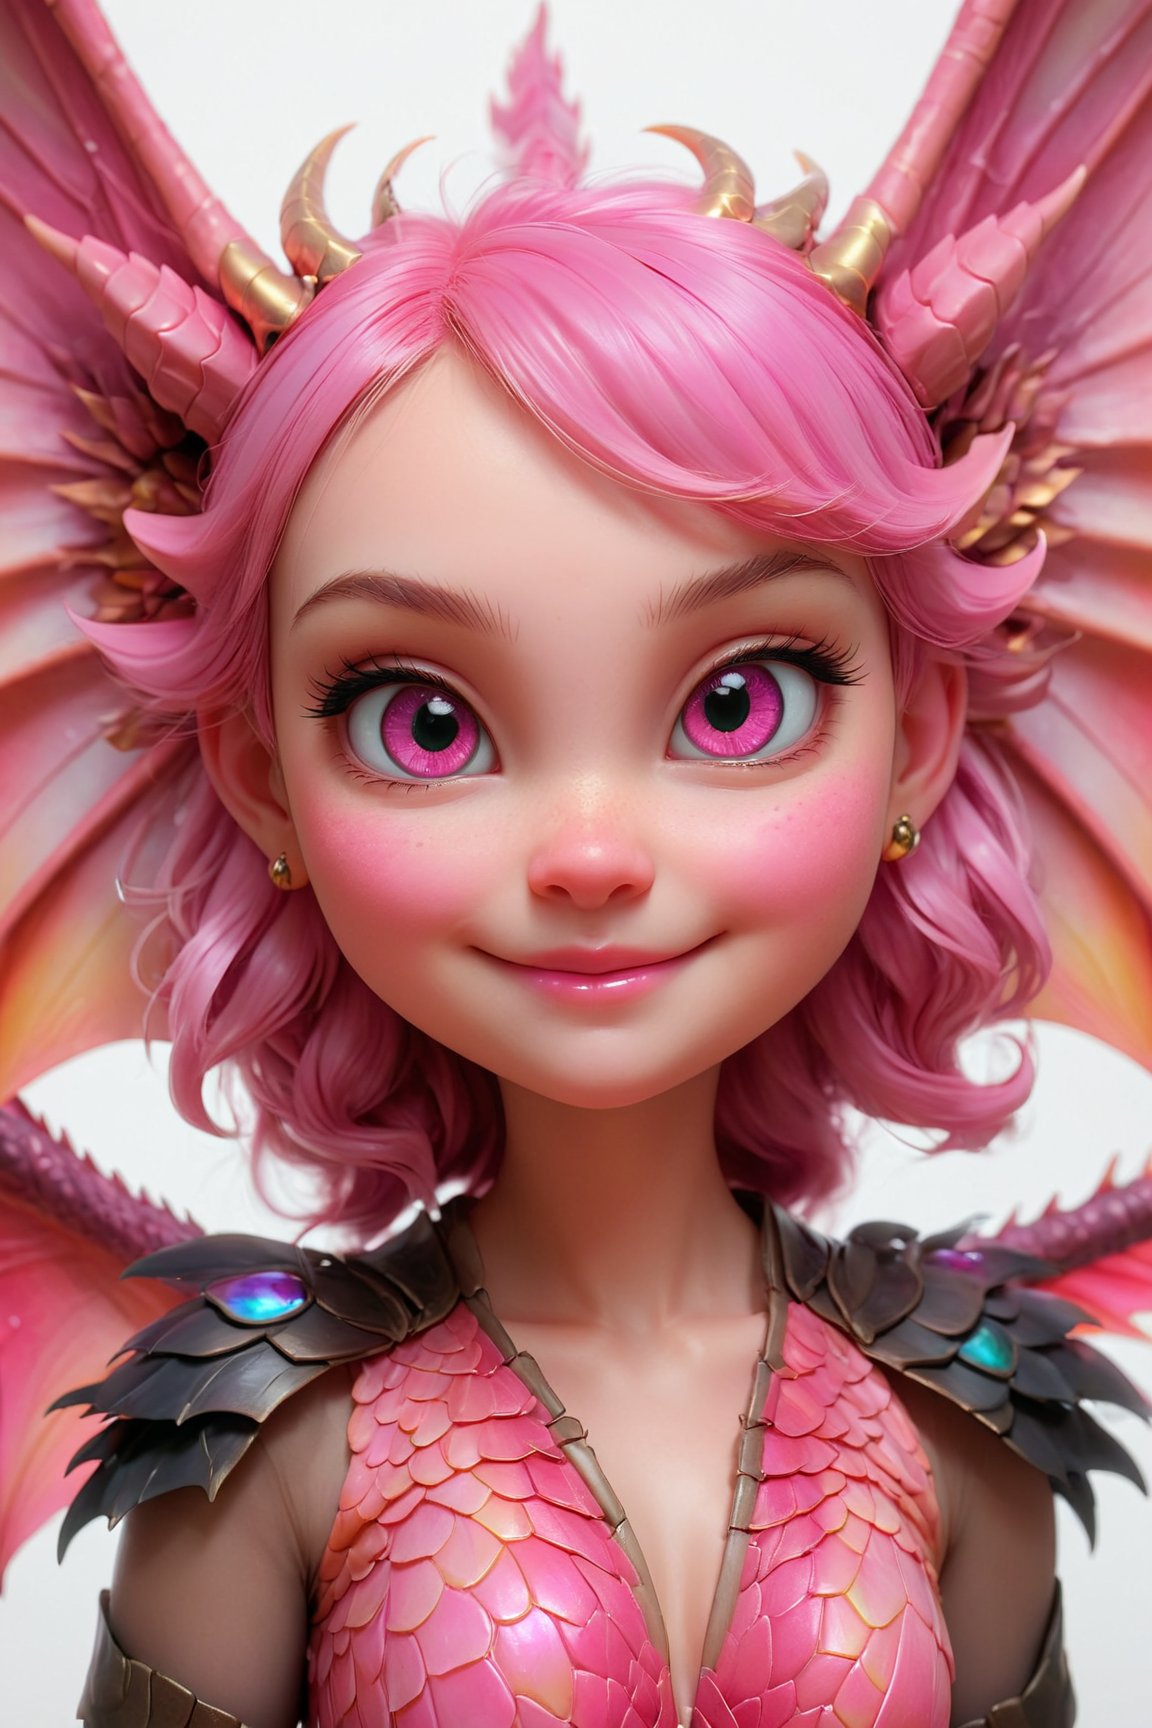 (best quality,8K,highres,masterpiece), ultra-detailed, (super colorful, pink dragon face), depicting the enchanting visage of a baby dragon, Her radiant pink scales glisten with vibrancy as she gazes at the viewer with a warm smile. Set against a simple yet striking white background, this illustration focuses on her charming face, showcasing her sparkling black eyes and the magnificent wings and head wings that frame her expression. The dragon's appearance is reminiscent of a delightful creature from the world of Pokémon, harmoniously fused with fantastical elements and a mesmerizing array of vivid pink hues, creating a captivating and stunning masterpiece.